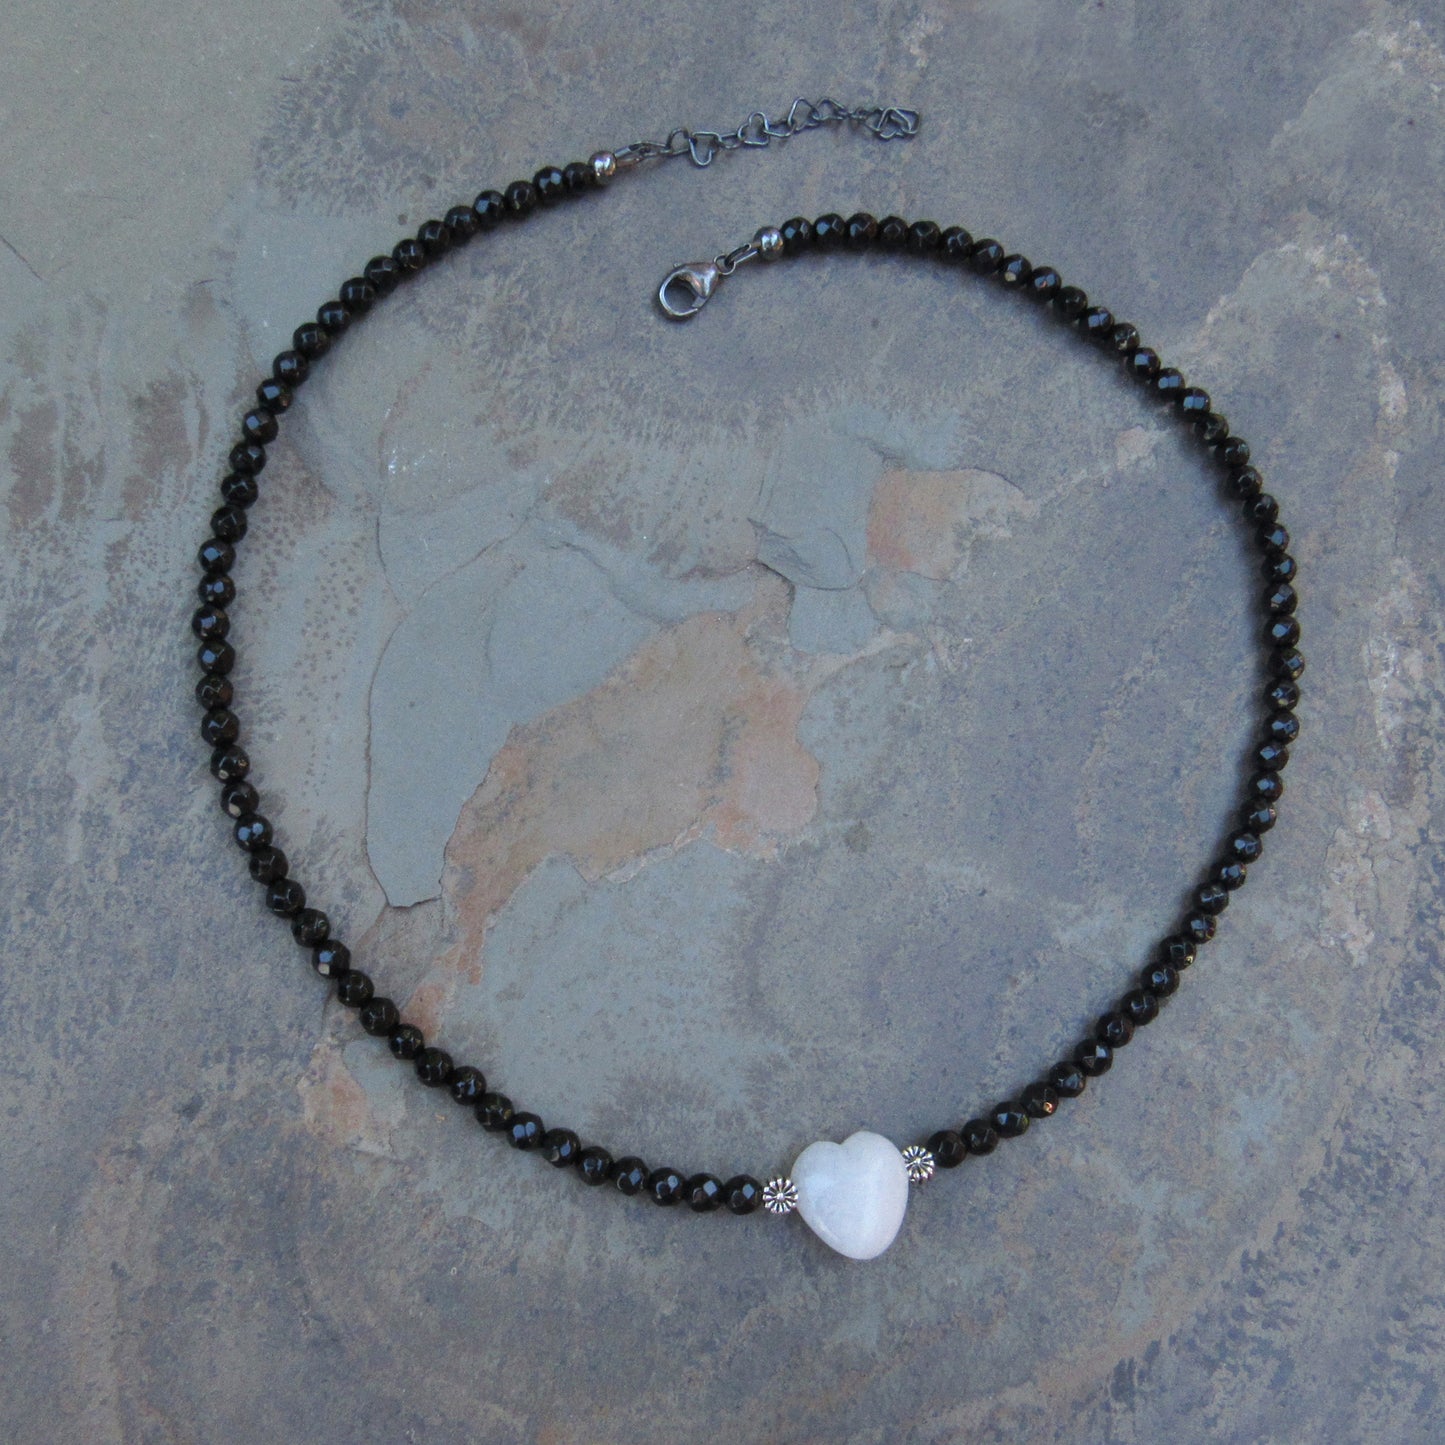 White Jade Heart, Faceted Onyx, and Sterling Silver Choker